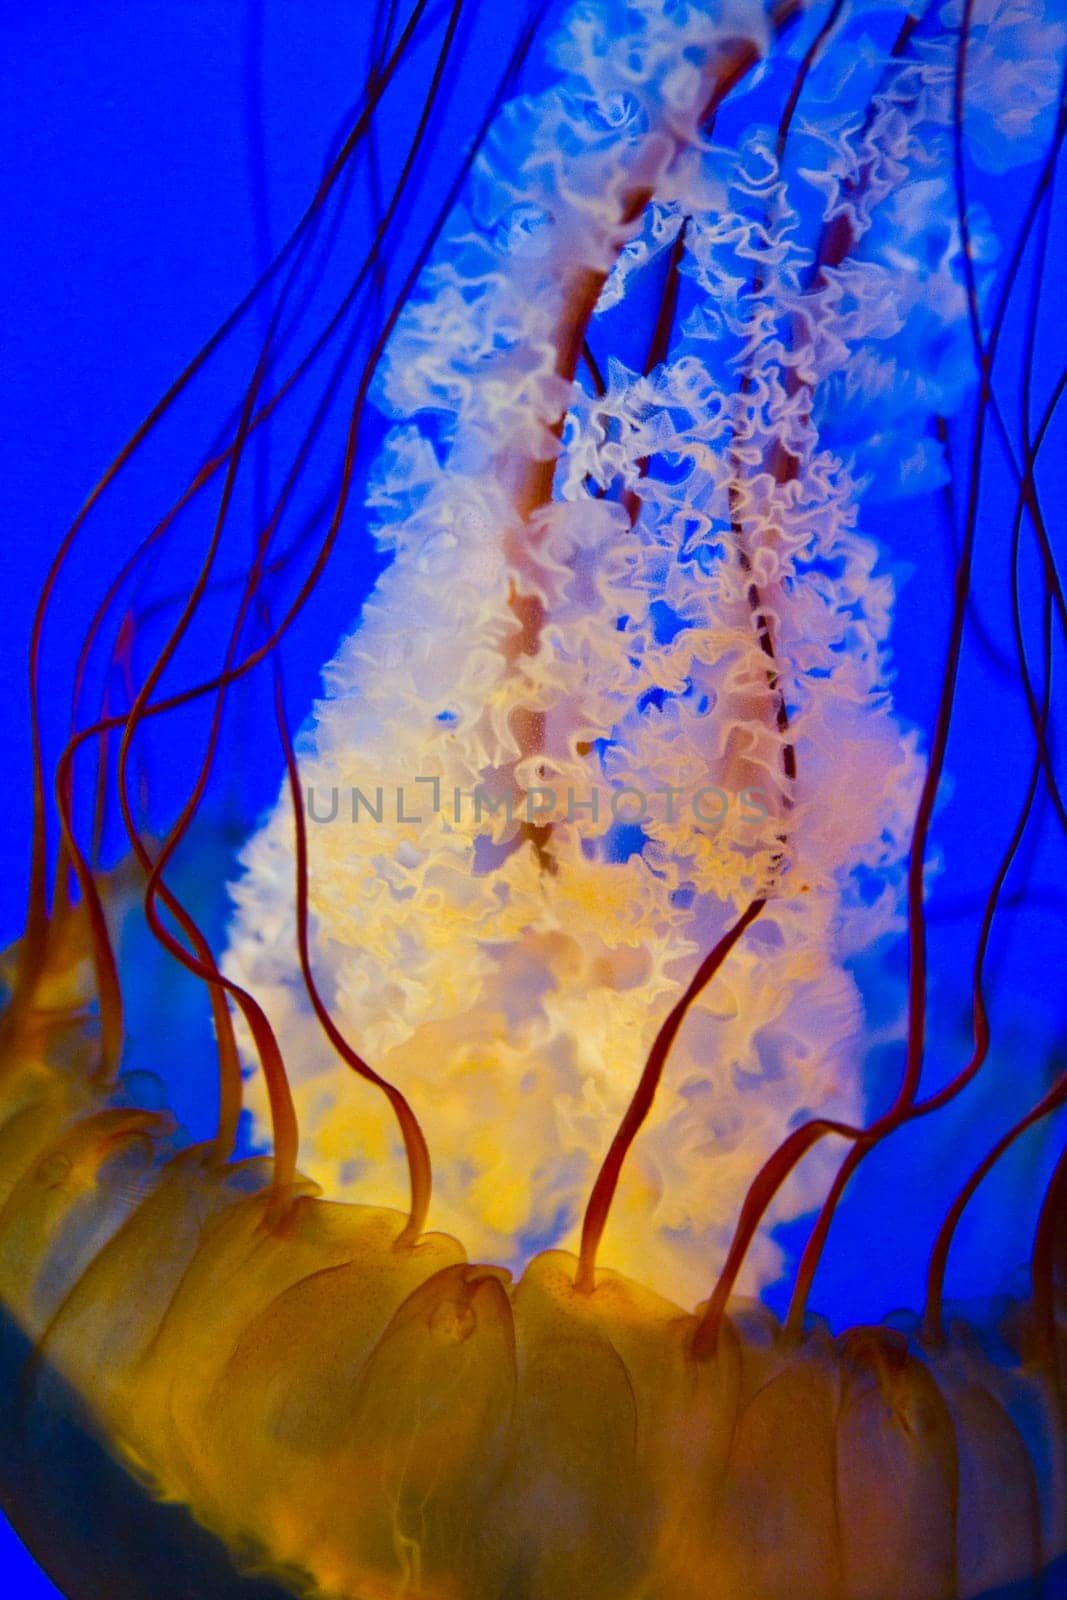 Mesmerizing golden jellyfish gracefully dances in the depths of an oceanic environment, showcasing vibrant tentacles and delicate oral arms. A serene and ethereal capture of marine life in Tennessee's Aquarium.